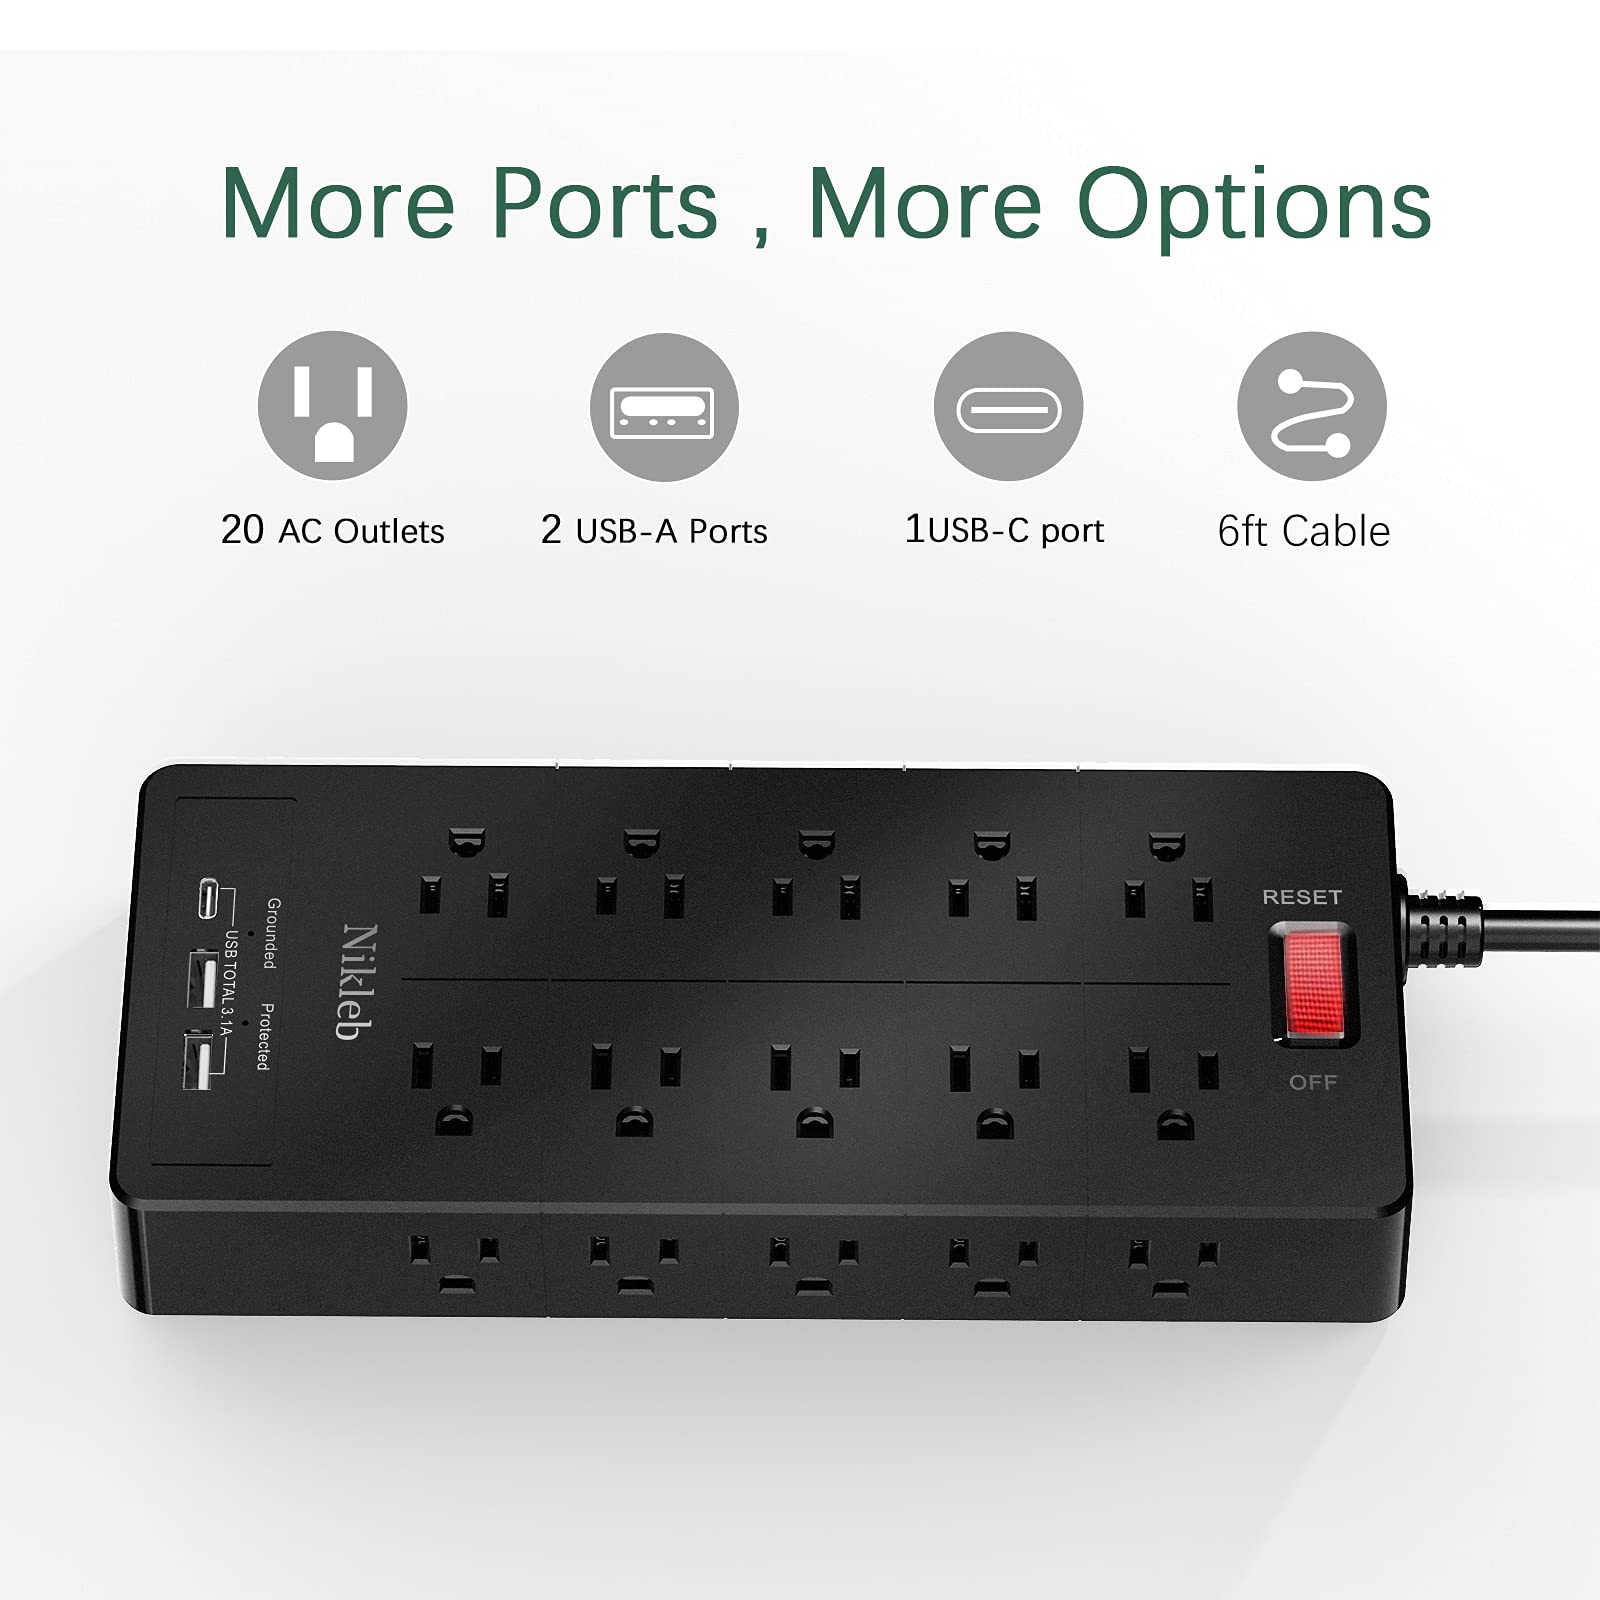 Power Strip 23 in 1, 20 Outlets Surge Protector Wall Mount with 2 USB Ports + 1 USB C Port 3.1A Total, Multi Plug Extension Cord 6ft Heavy Duty, USB Charging Station for Multiple Devices, Home, Office